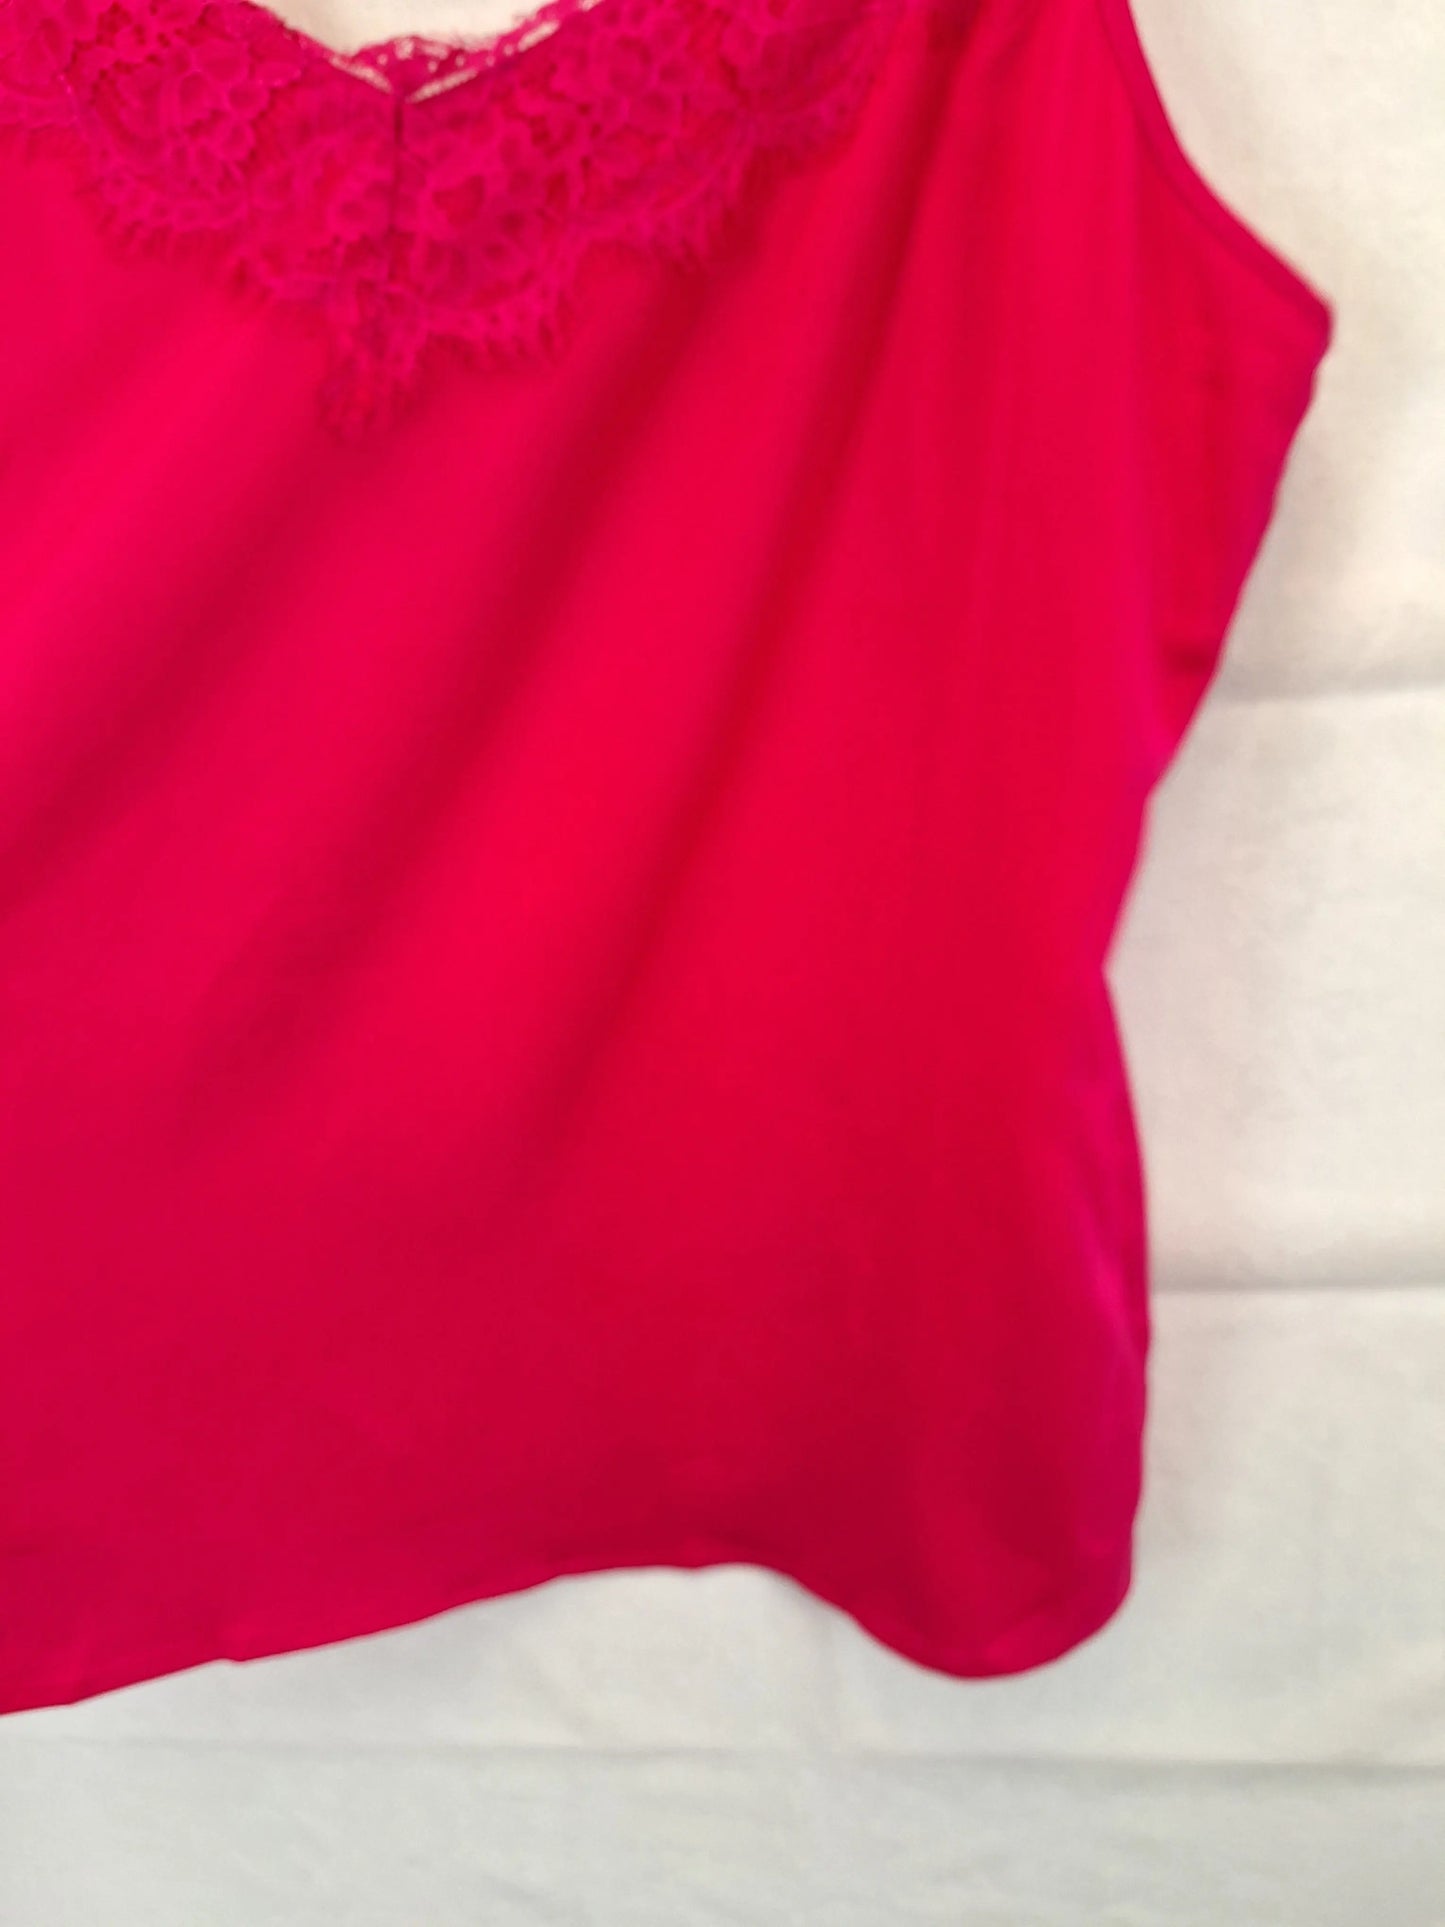 Review Fuchsia Lace Camisole Top Size 16 by SwapUp-Online Second Hand Store-Online Thrift Store